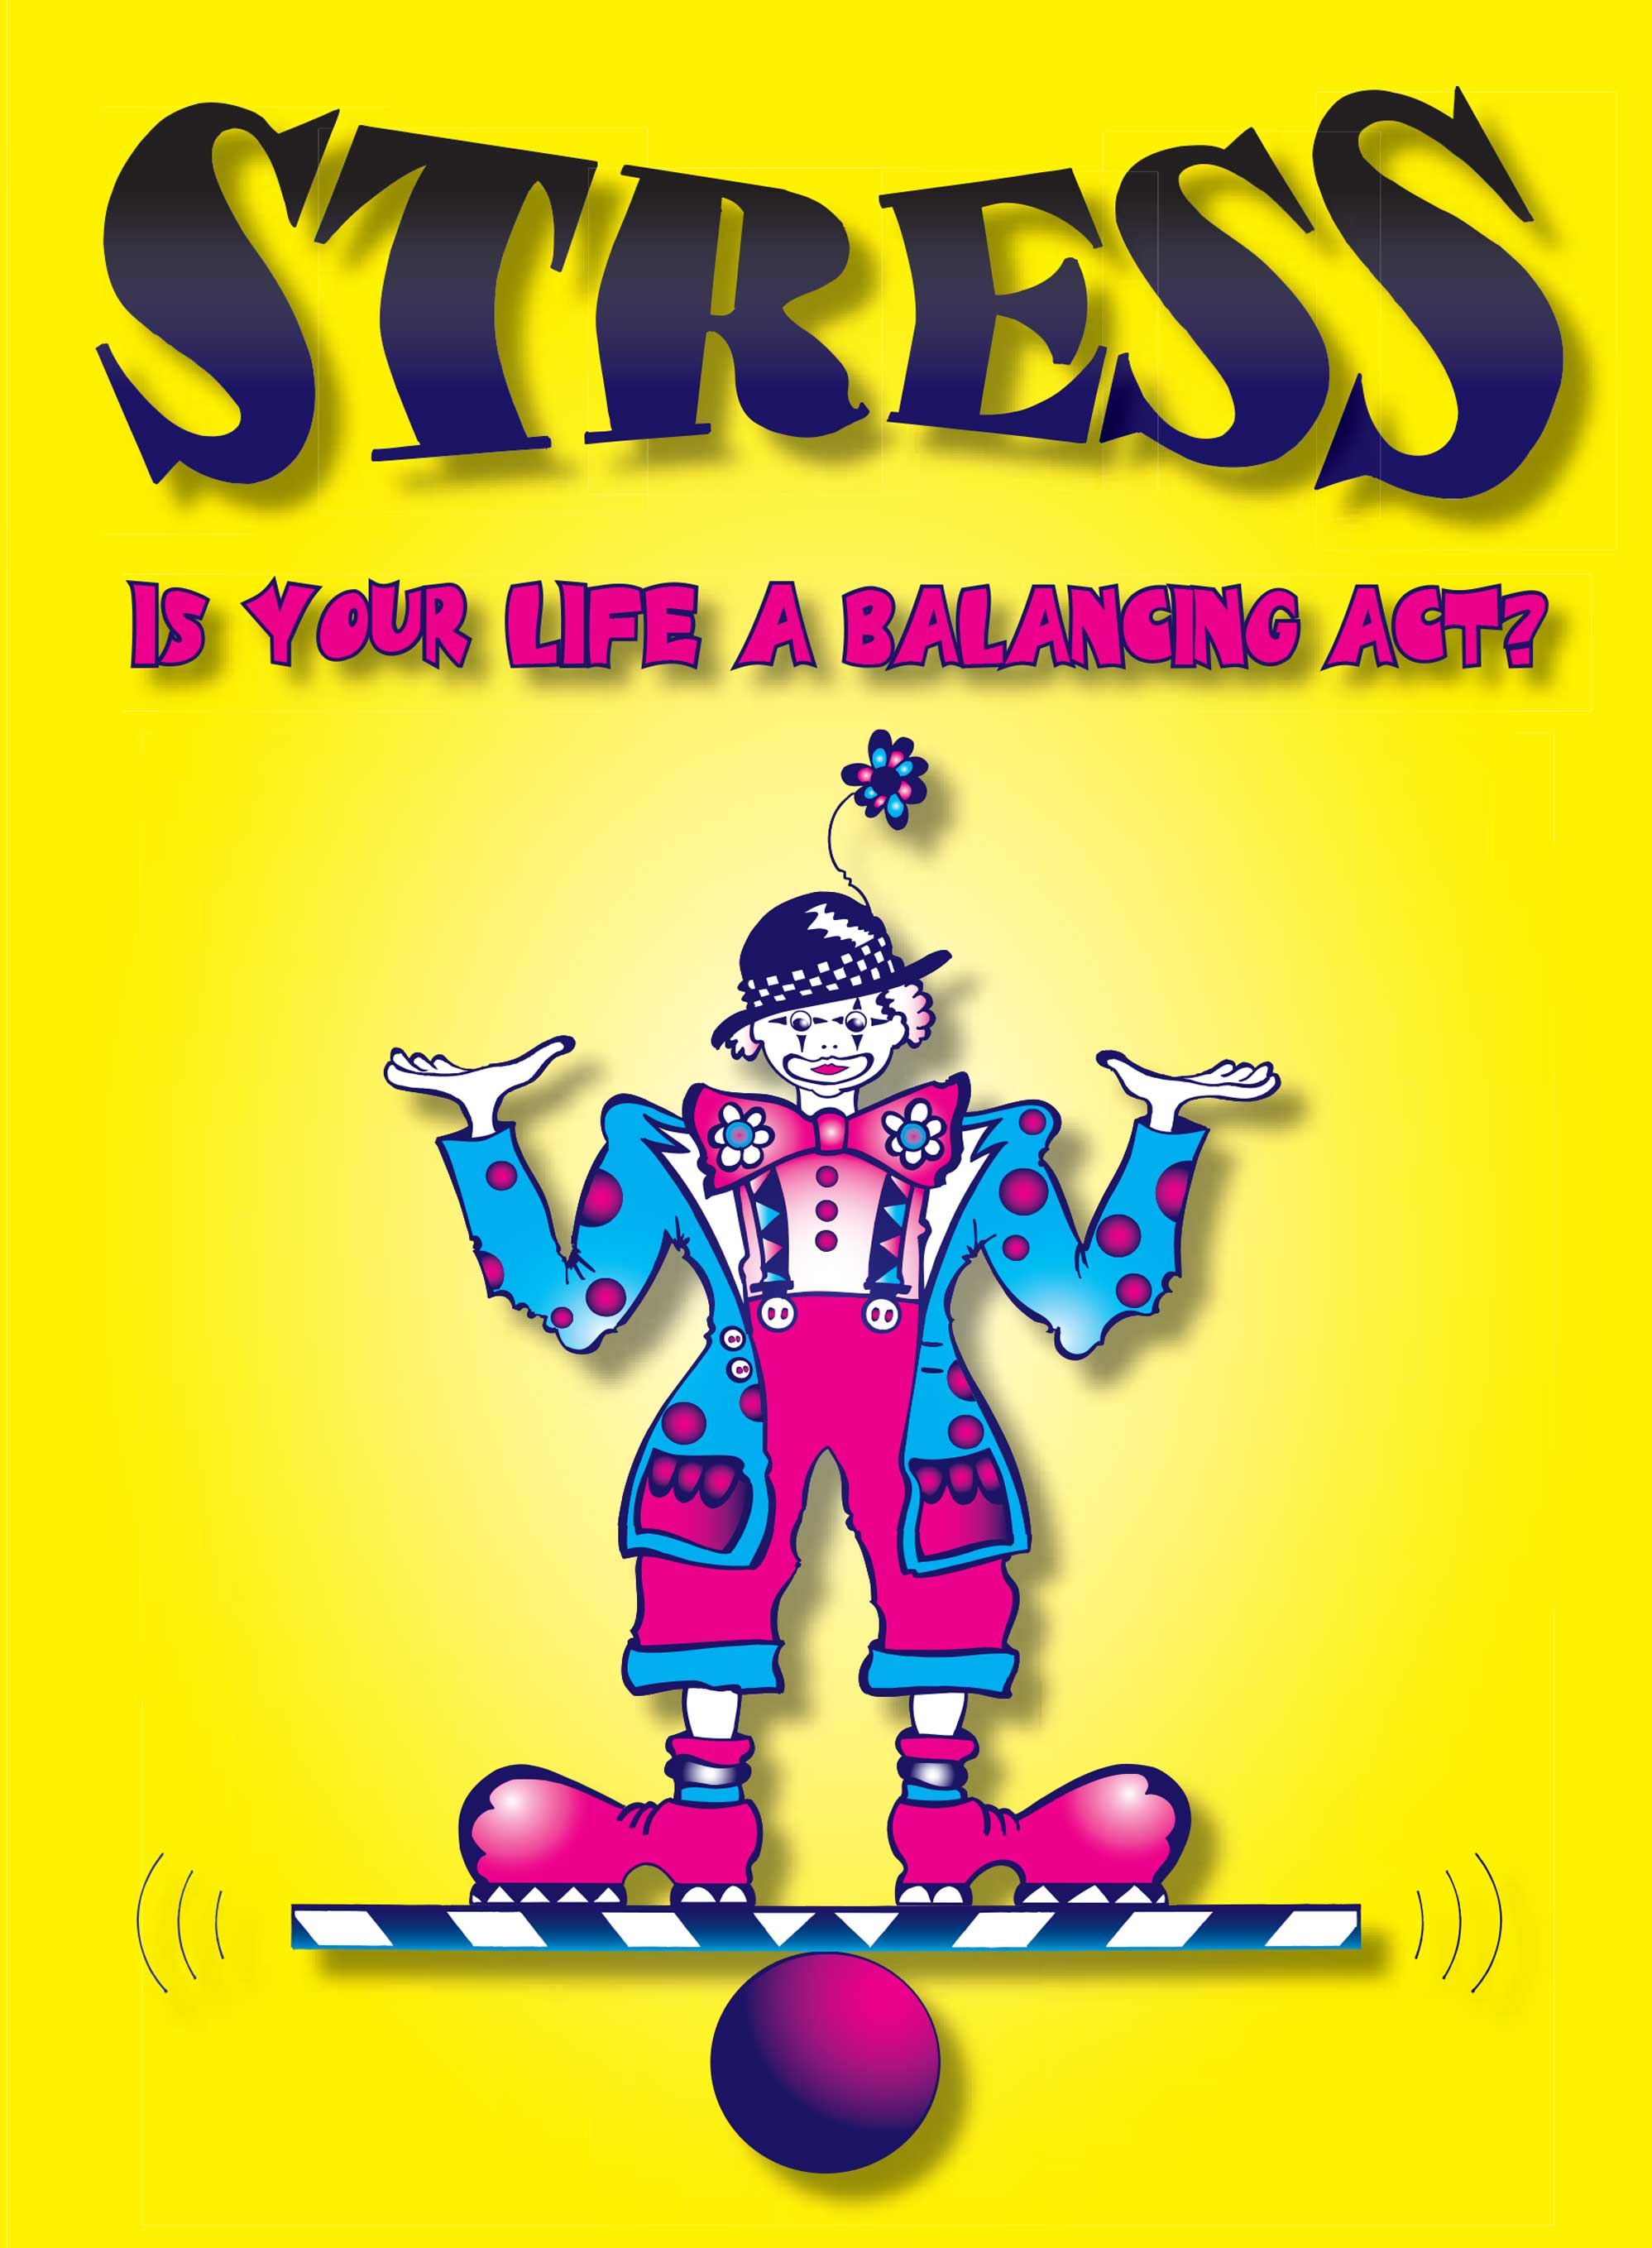 Stress - is your life a balancing act?